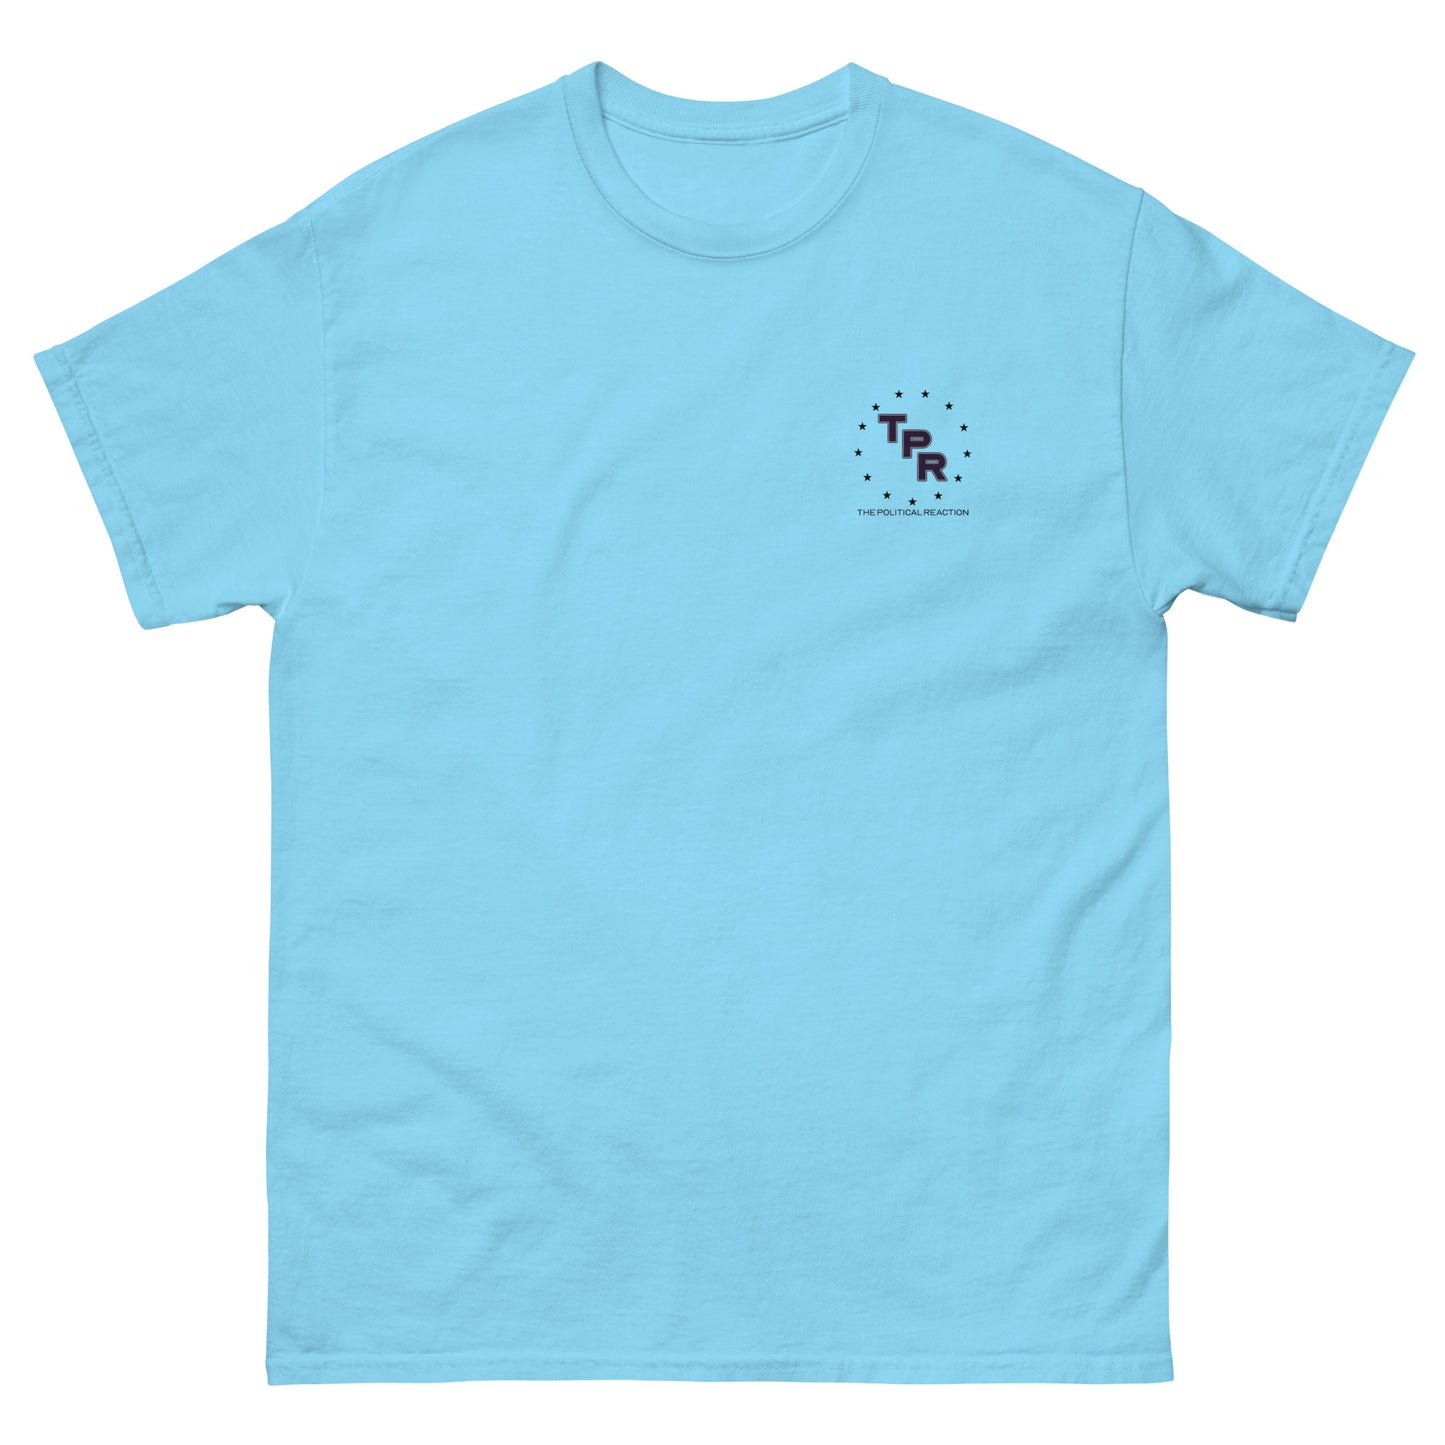 TPR-Classic-Unisex-Tee-Sky-blue-front